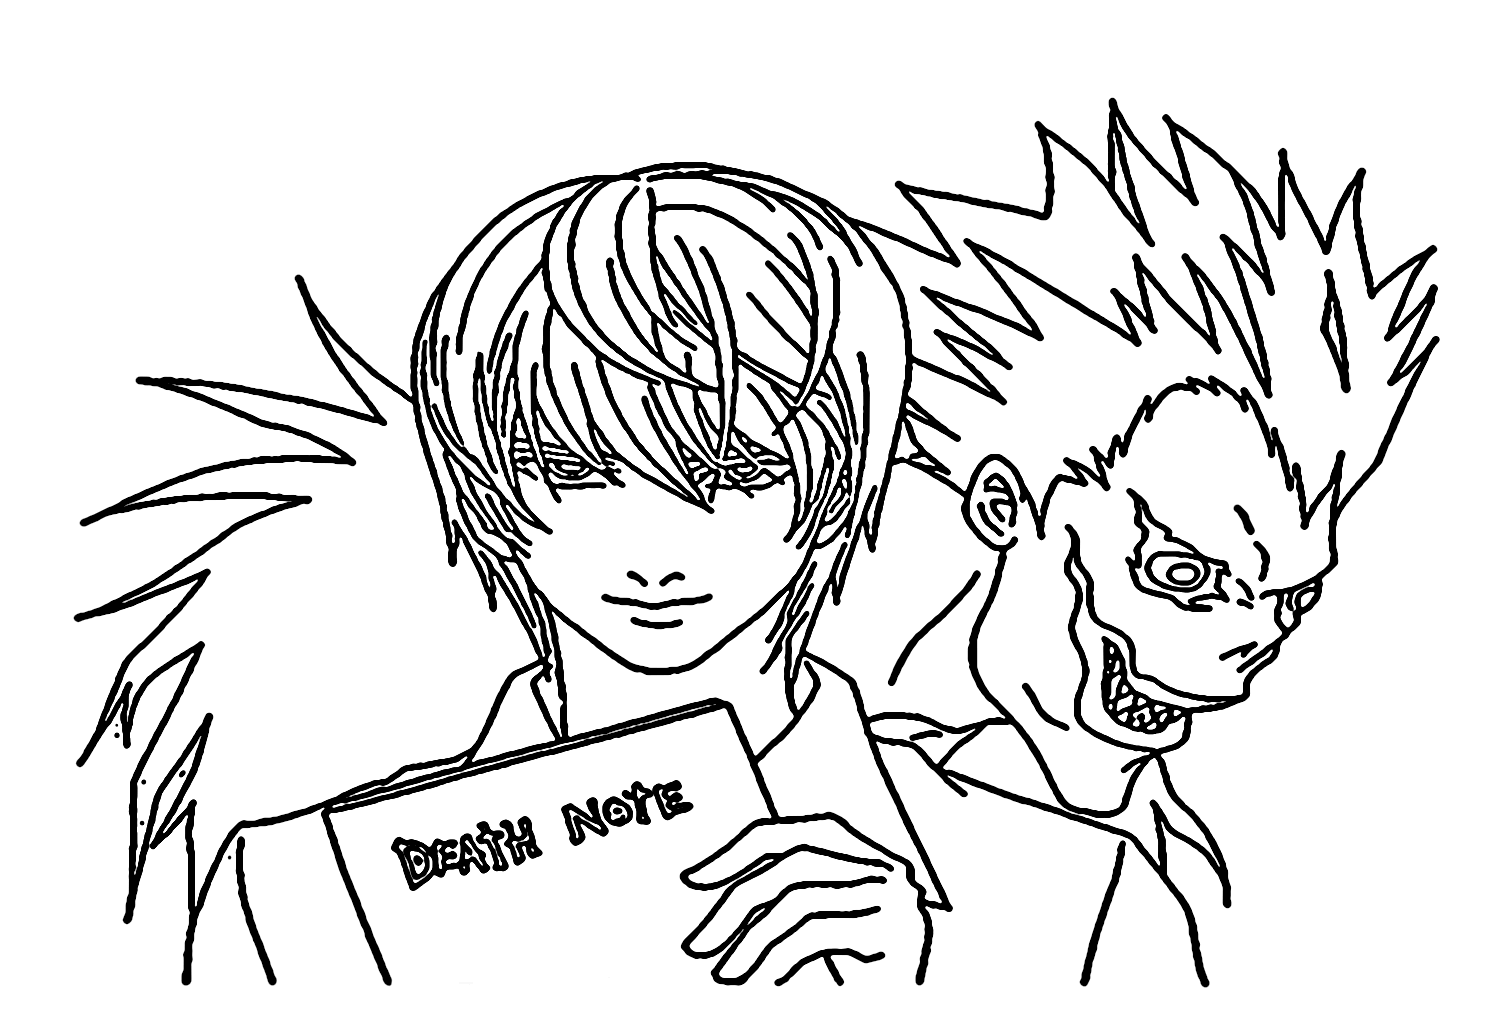 Light and Ryuk from Death Note Coloring Pages